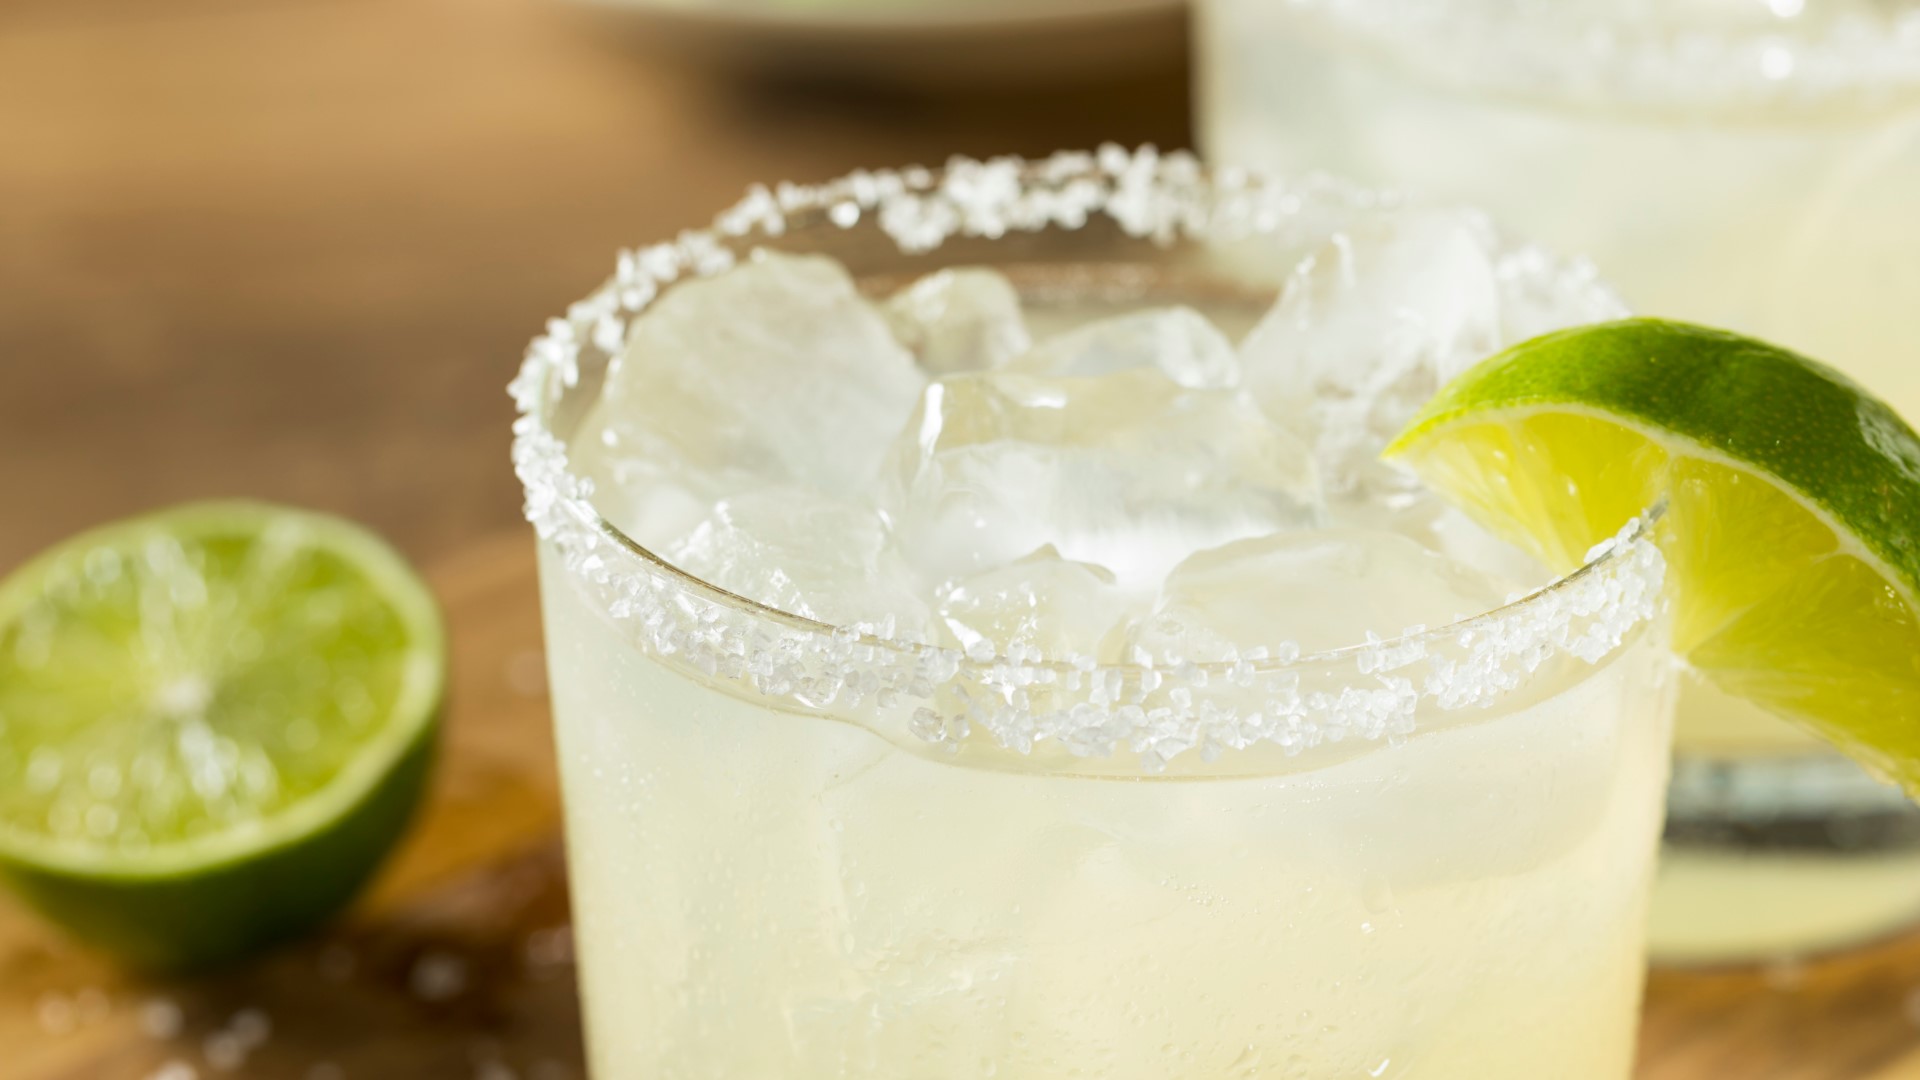 Chef Missy Tuttle-Ferrio with Bahama Breeze is celebrating National Margarita Day by mixing up the new Mystic Margarita while paying tribute to the Classic Margaritas and showcasing a Tequila Sunburn Glazed Salmon.